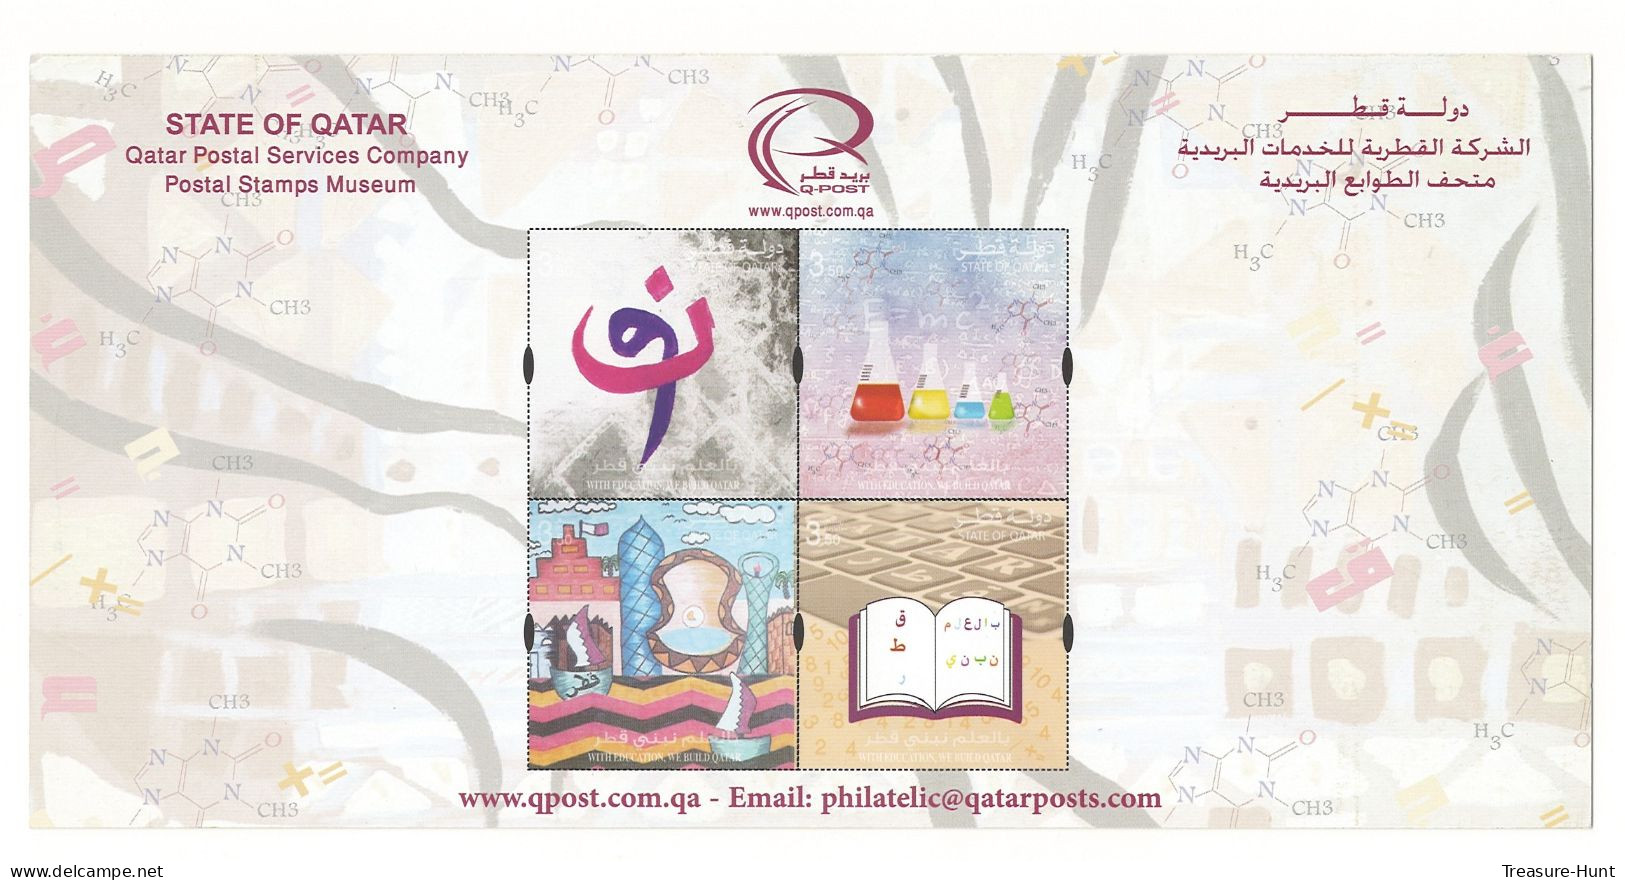 QATAR NEW STAMPS ISSUE BULLETIN / BROCHURE / POSTAL NOTICE -2016 EDUCATION DAY, CHILDREN PAINTINGS ART BOOK SCIENCE - Qatar